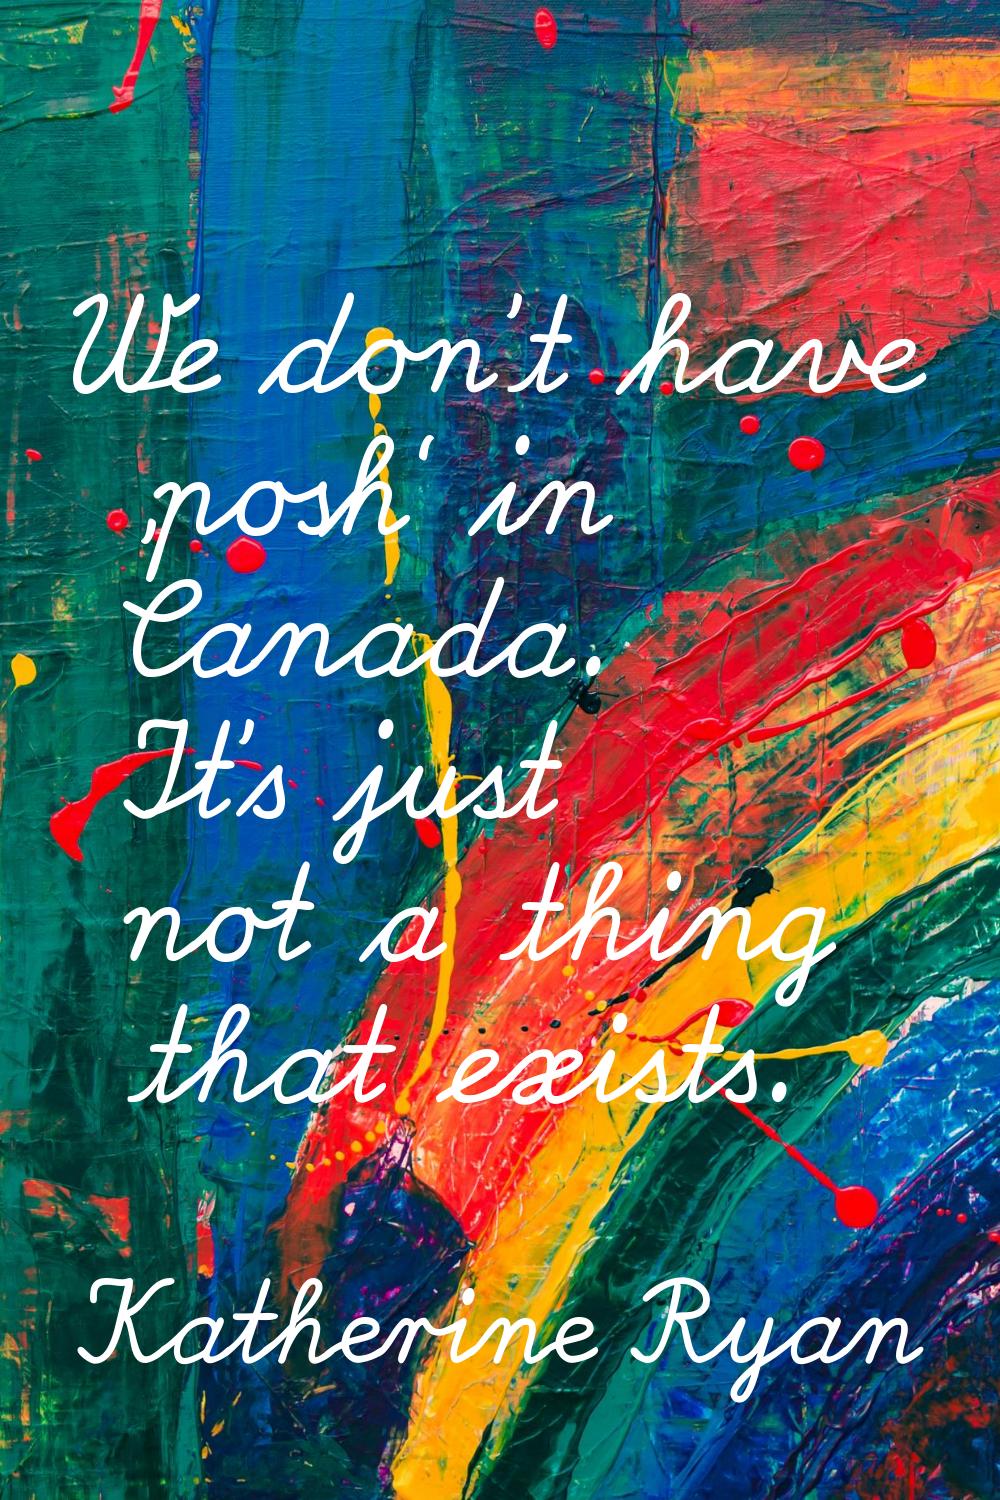 We don't have 'posh' in Canada. It's just not a thing that exists.